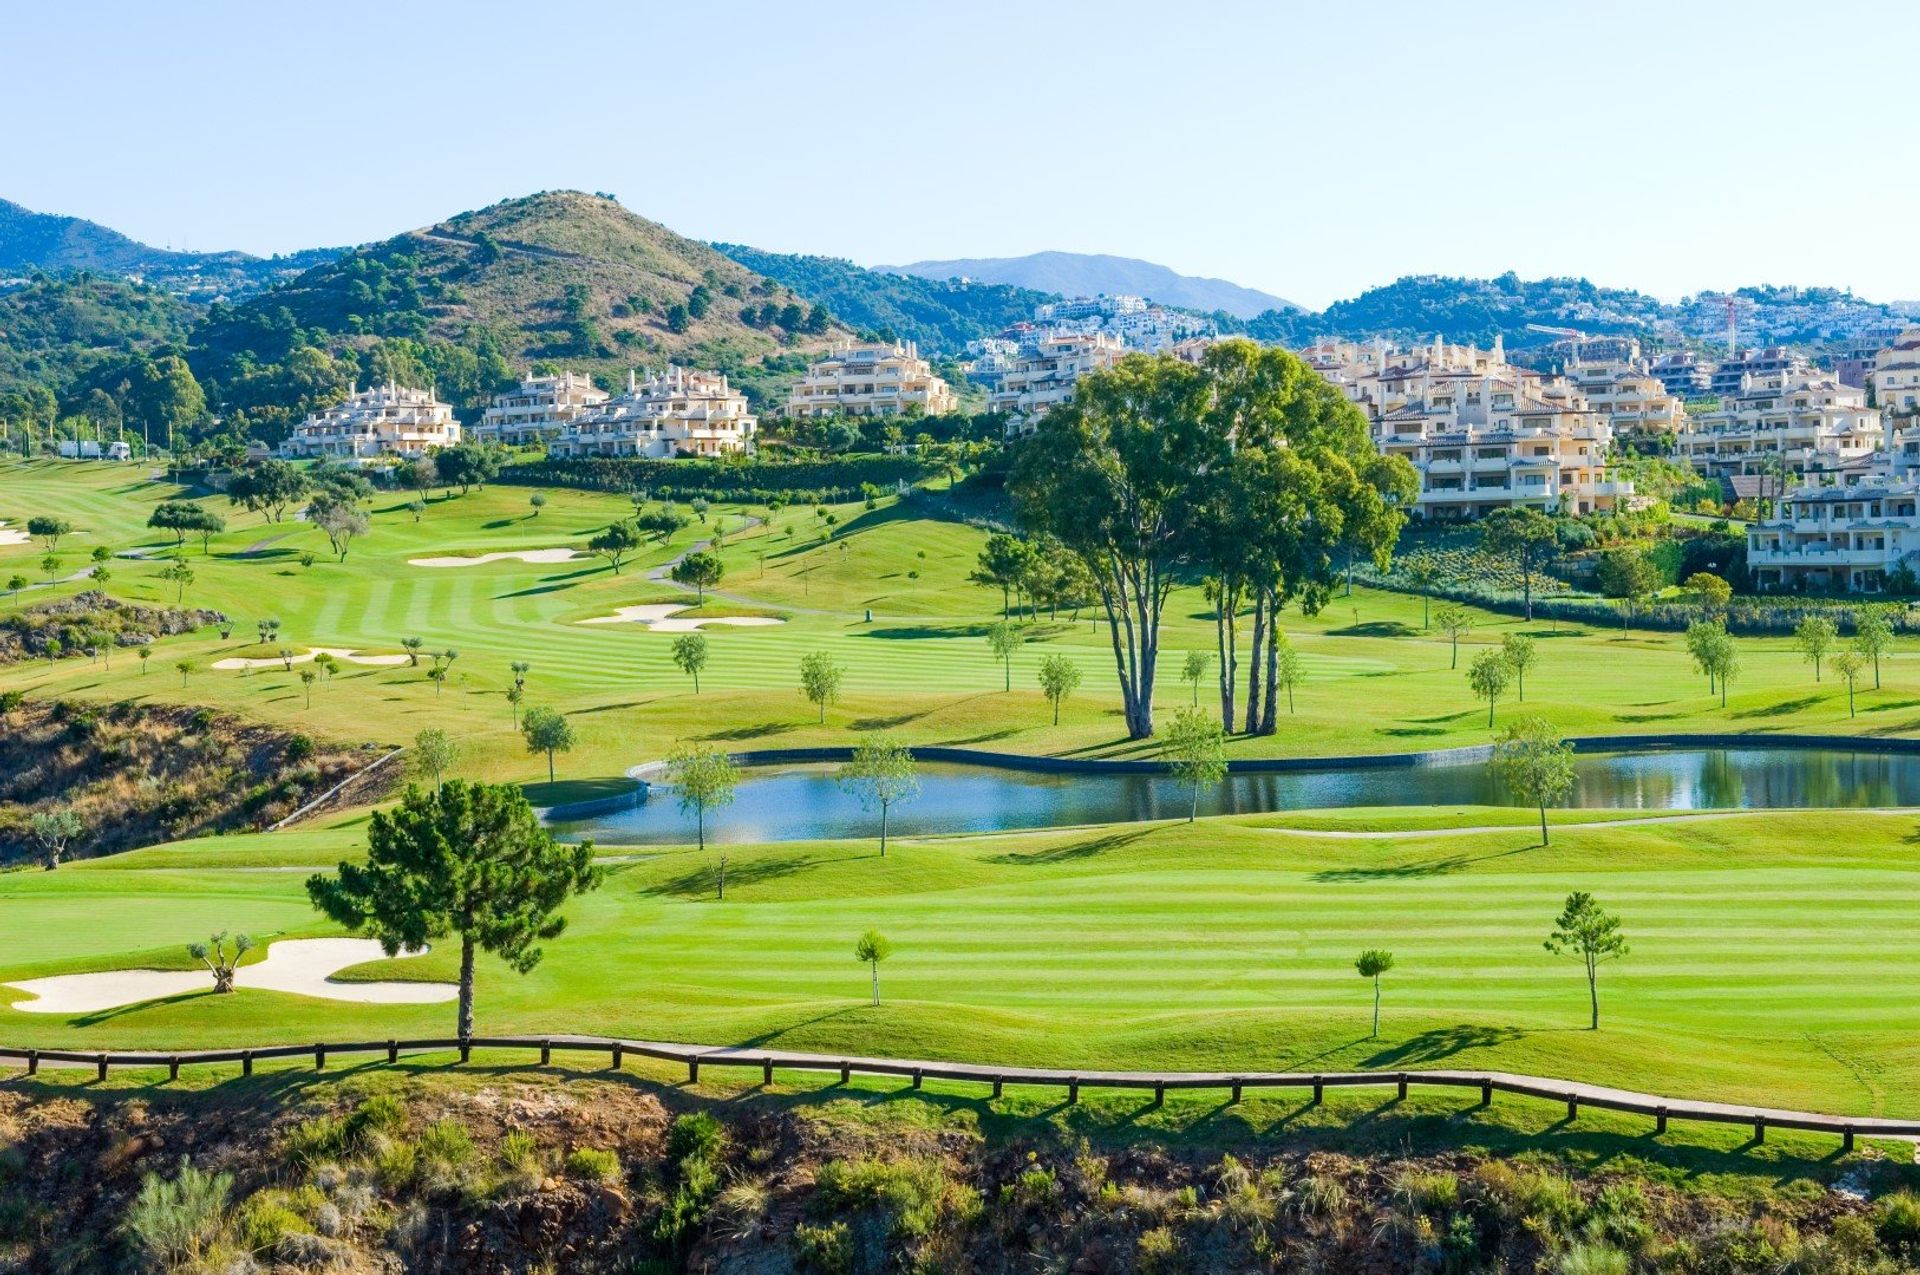 Practice your swing at one of the many golf courses scattered around Benahavis' vast landscape